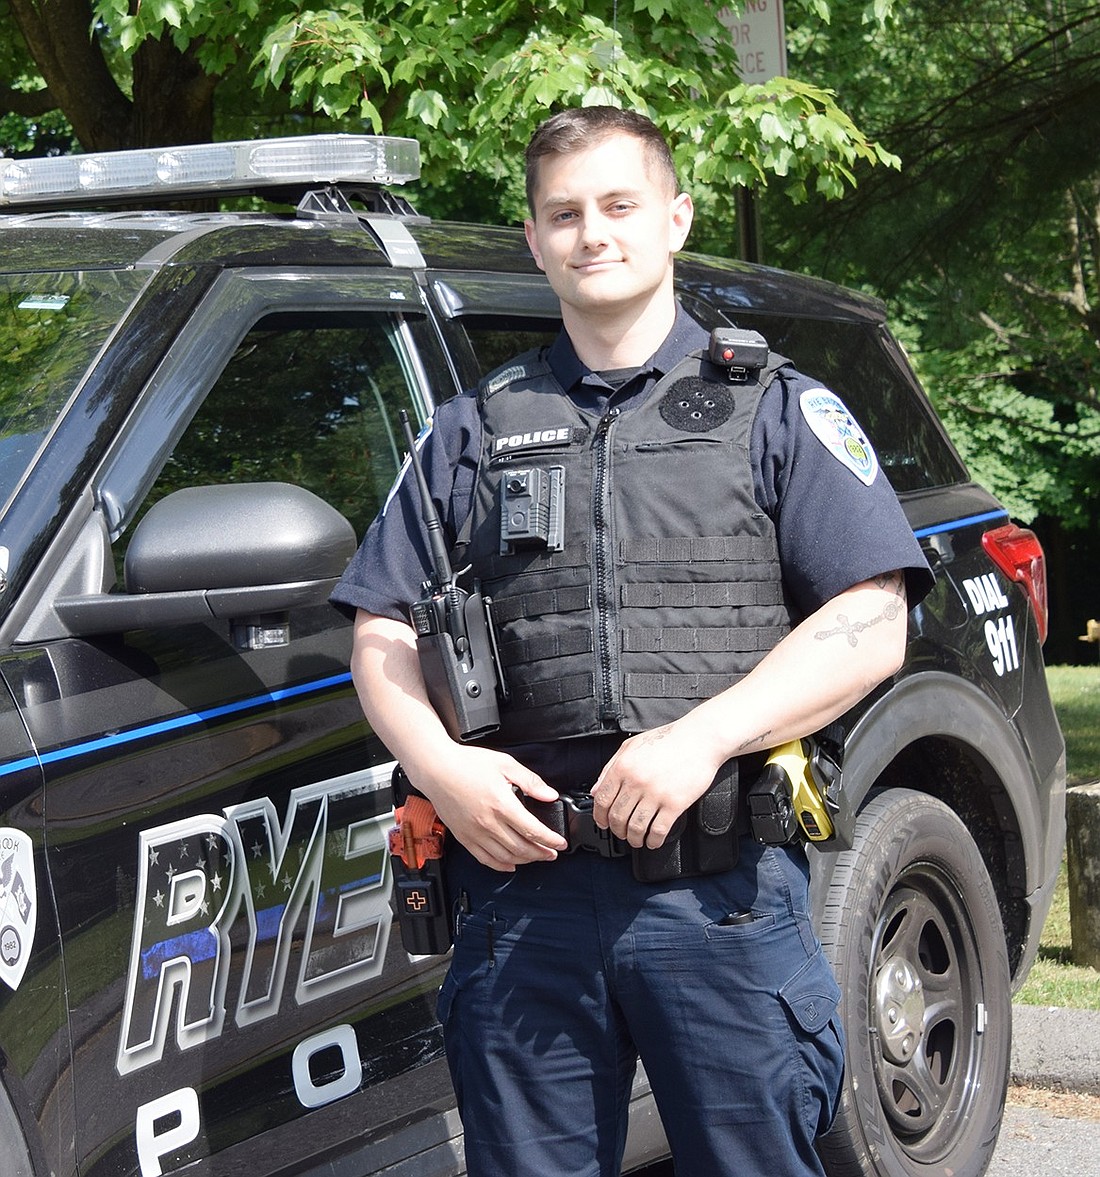 The Rye Brook Police Department’s newest officer, Trevor Byrnes, poses next to his patrol car at 938 King St. on Wednesday, June 5.